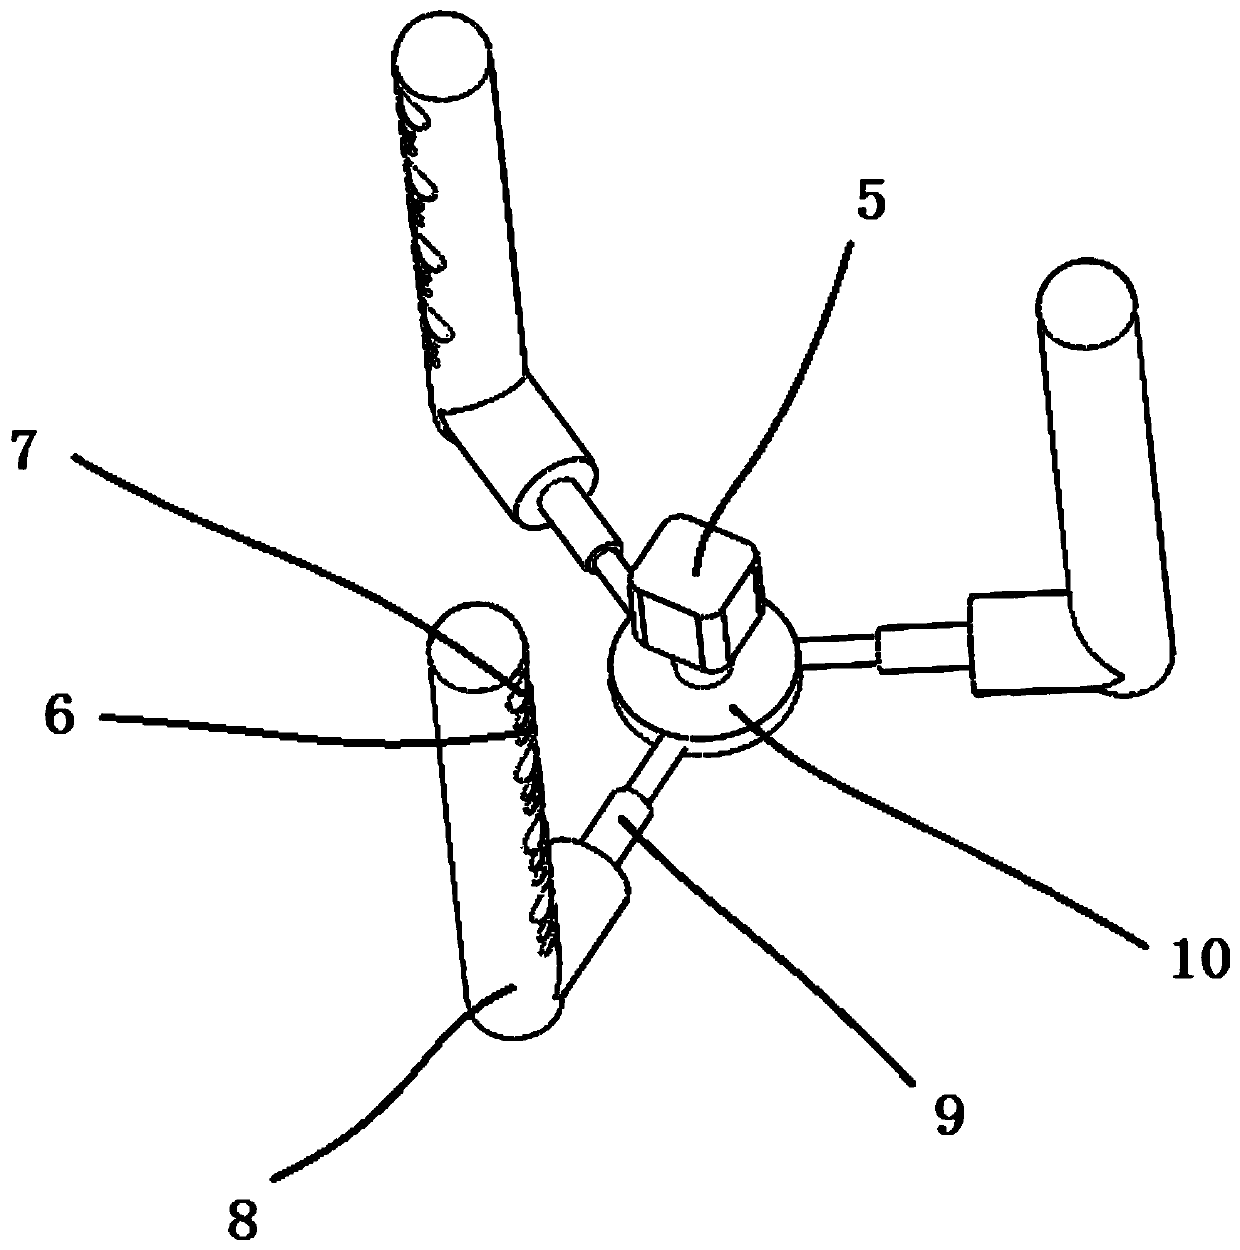 Catkin solidifying mechanical arm for municipal engineering and solidifying method